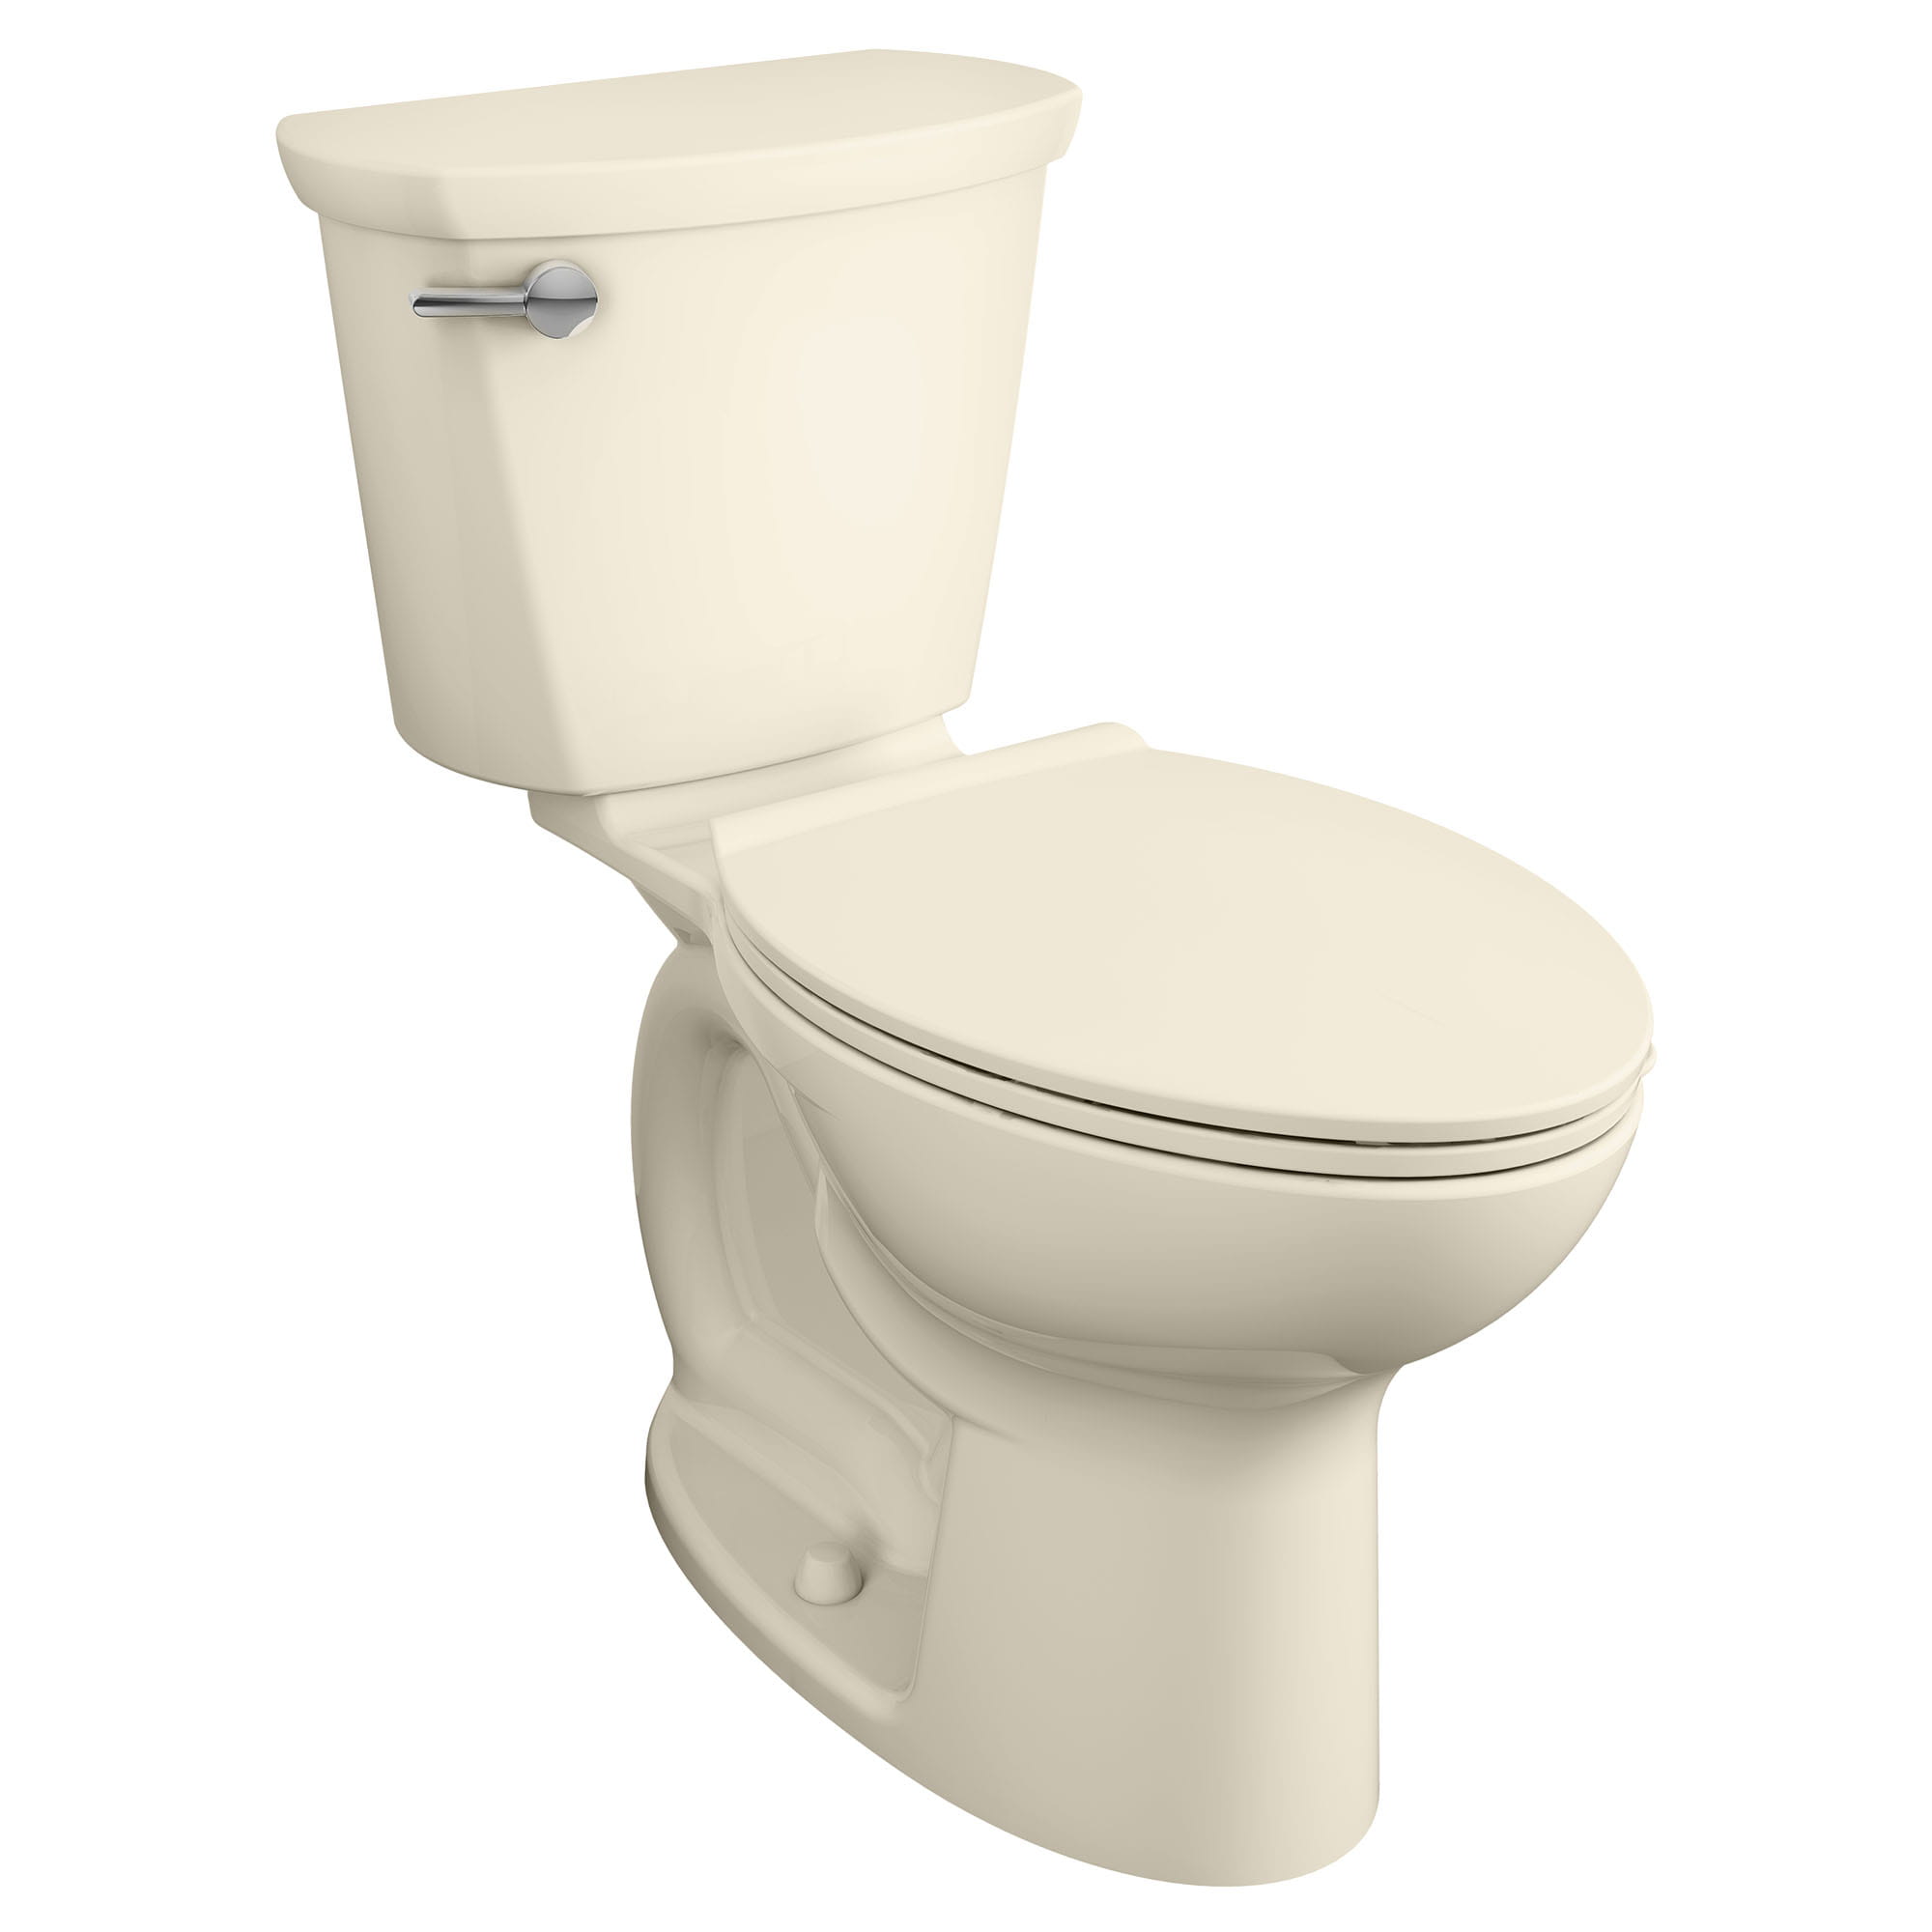 Cadet PRO Two Piece 128 gpf 48 Lpf Compact Chair Height Elongated 14 Inch Rough Toilet Less Seat BONE